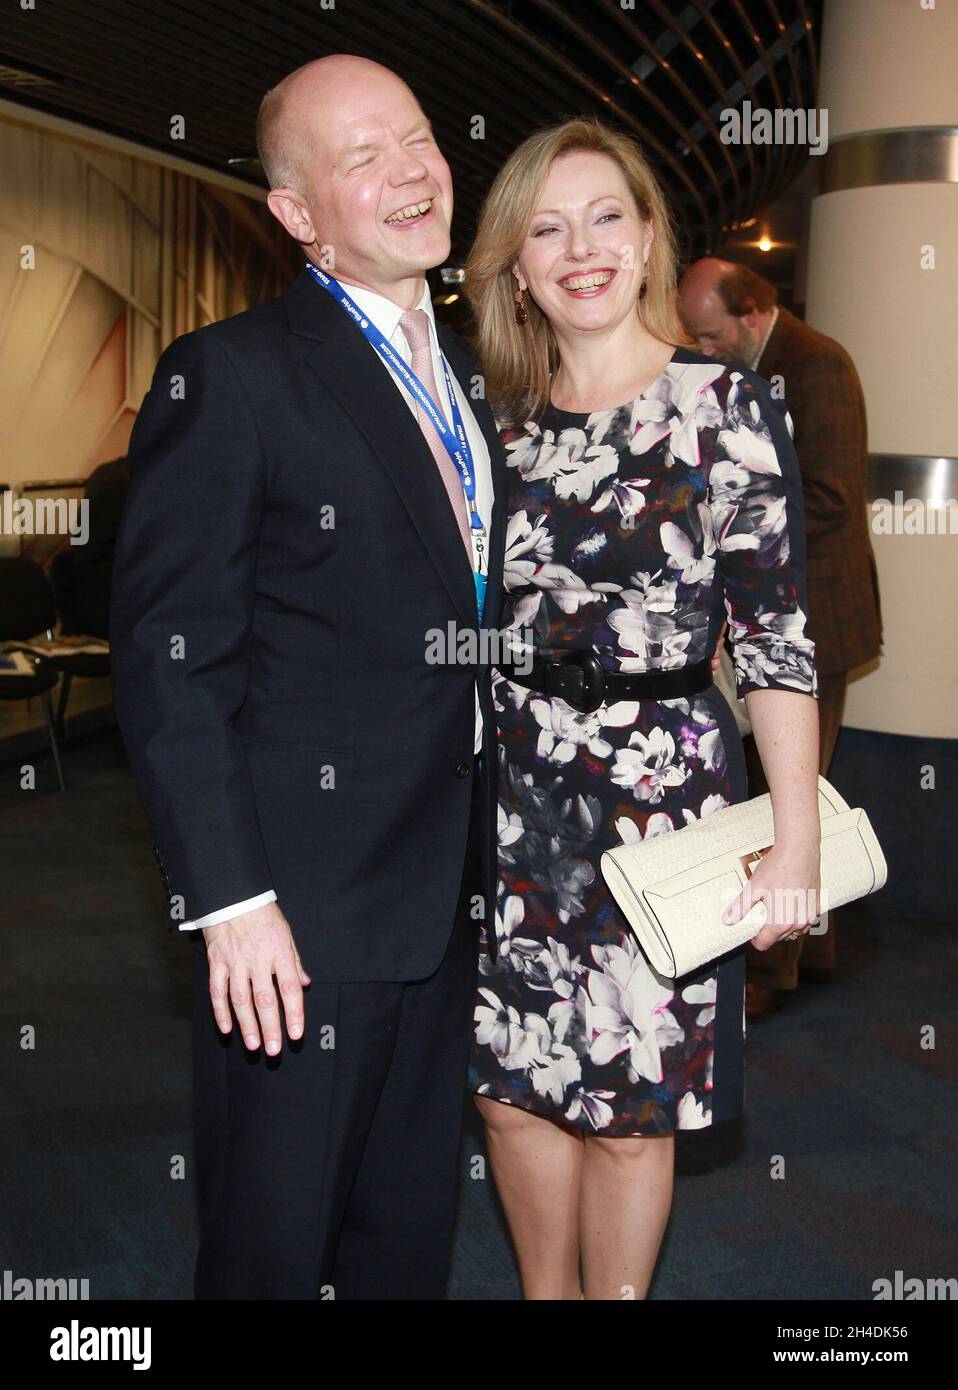 Leader of the House William Hague and his wife Ffion during the Conservative Party Conference 2014, at The ICC Birmingham. Stock Photo